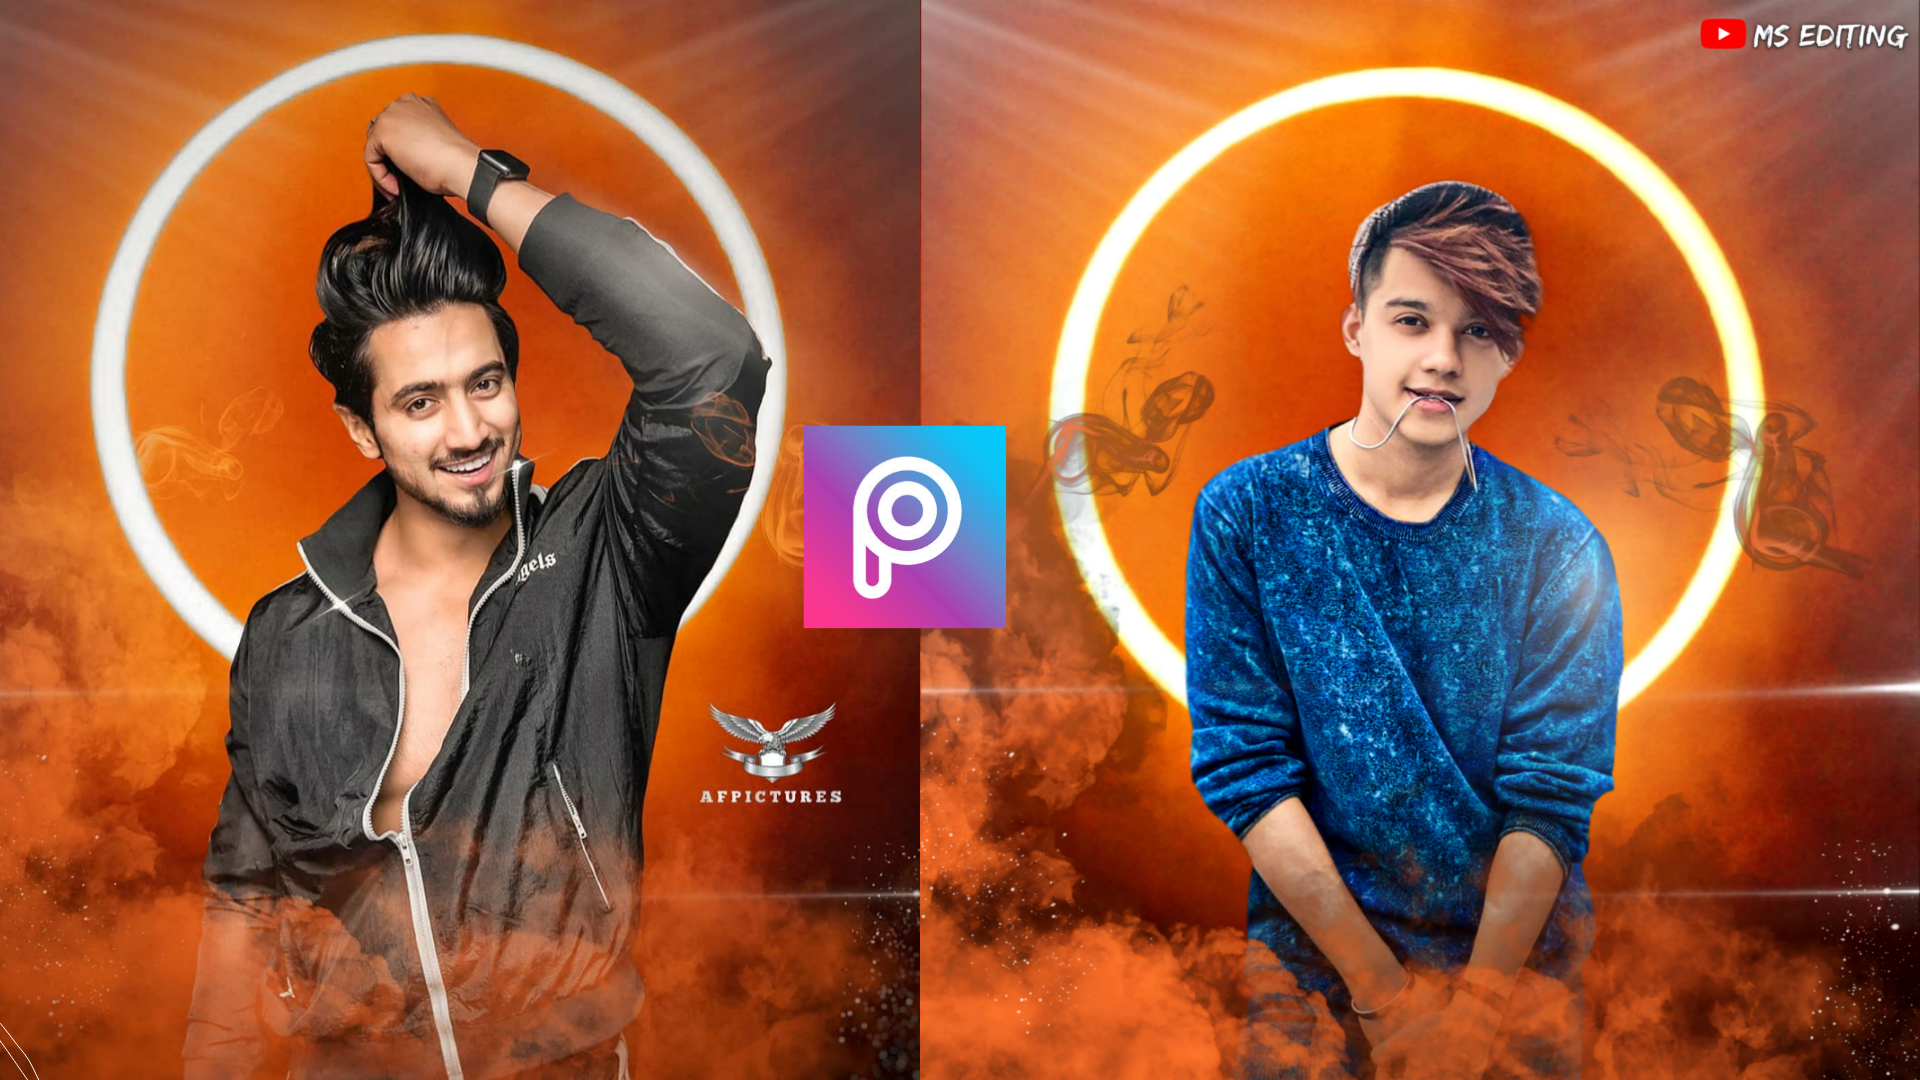 How To Edit Profile Photo In Picsart Instagram Viral Photo Editing Background Download